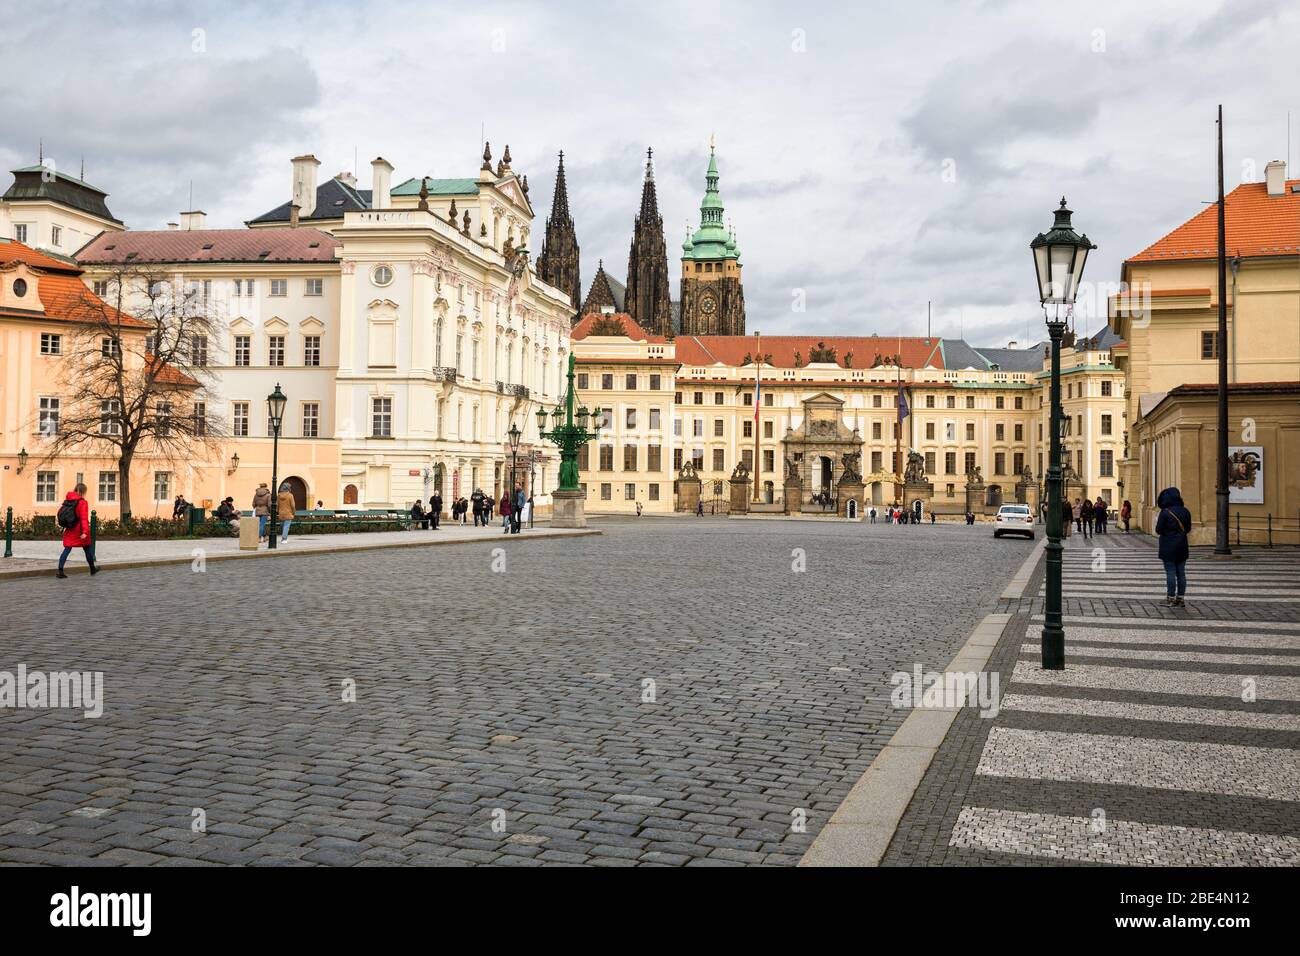 PRAGUE, CZECH REPUBLIC - MARCH 10, 2020: Hradcanske Square, the Archbishop Palace and Prague Castle. People in the square Stock Photo